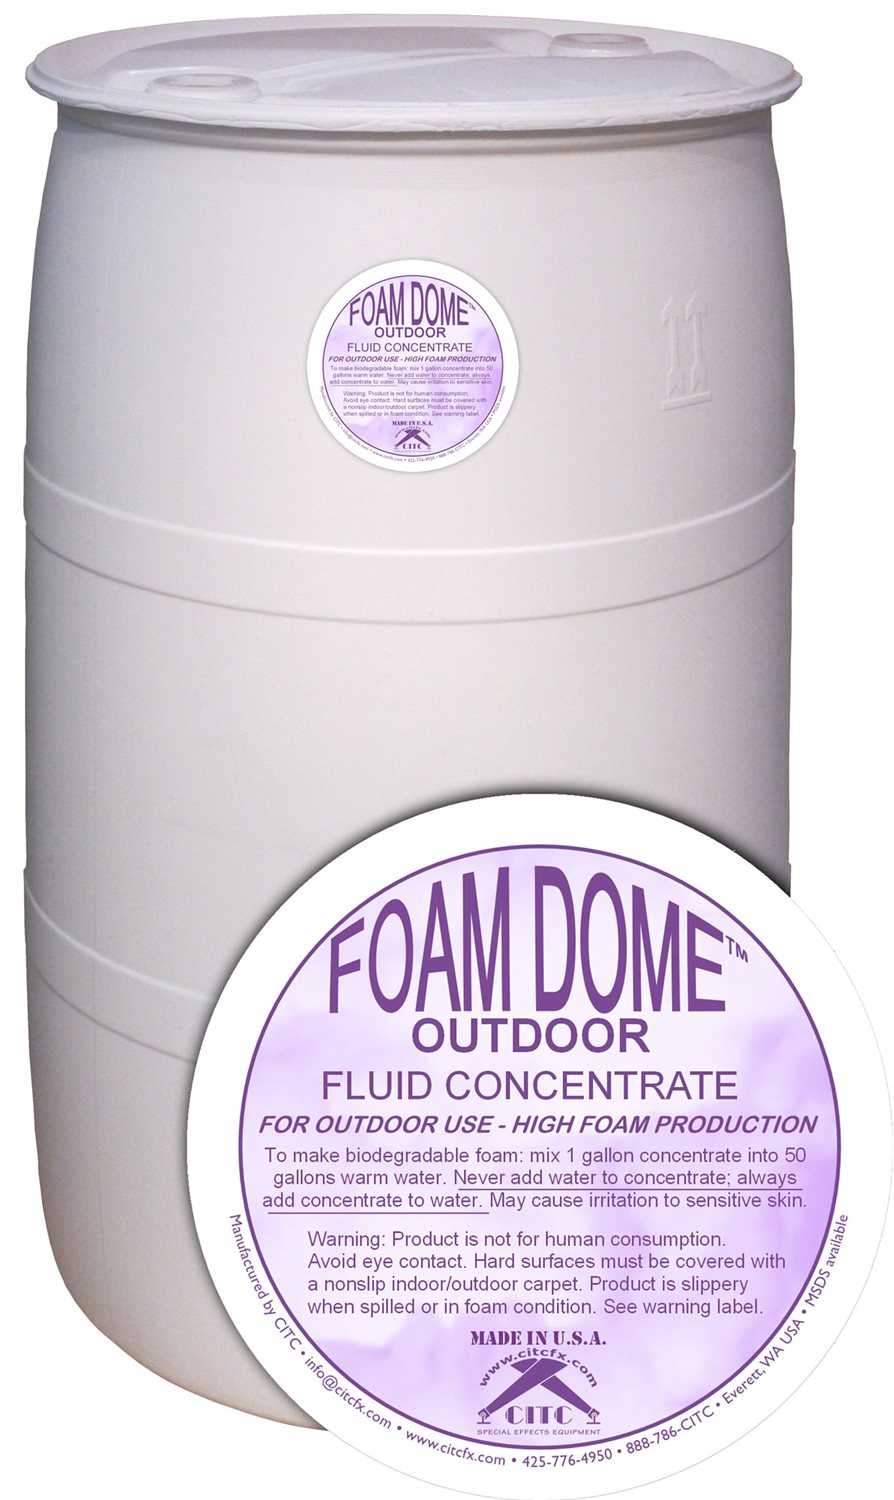 CITC Foam Dome Fluid OD Concentrate 55 Gal Drum - ProSound and Stage Lighting